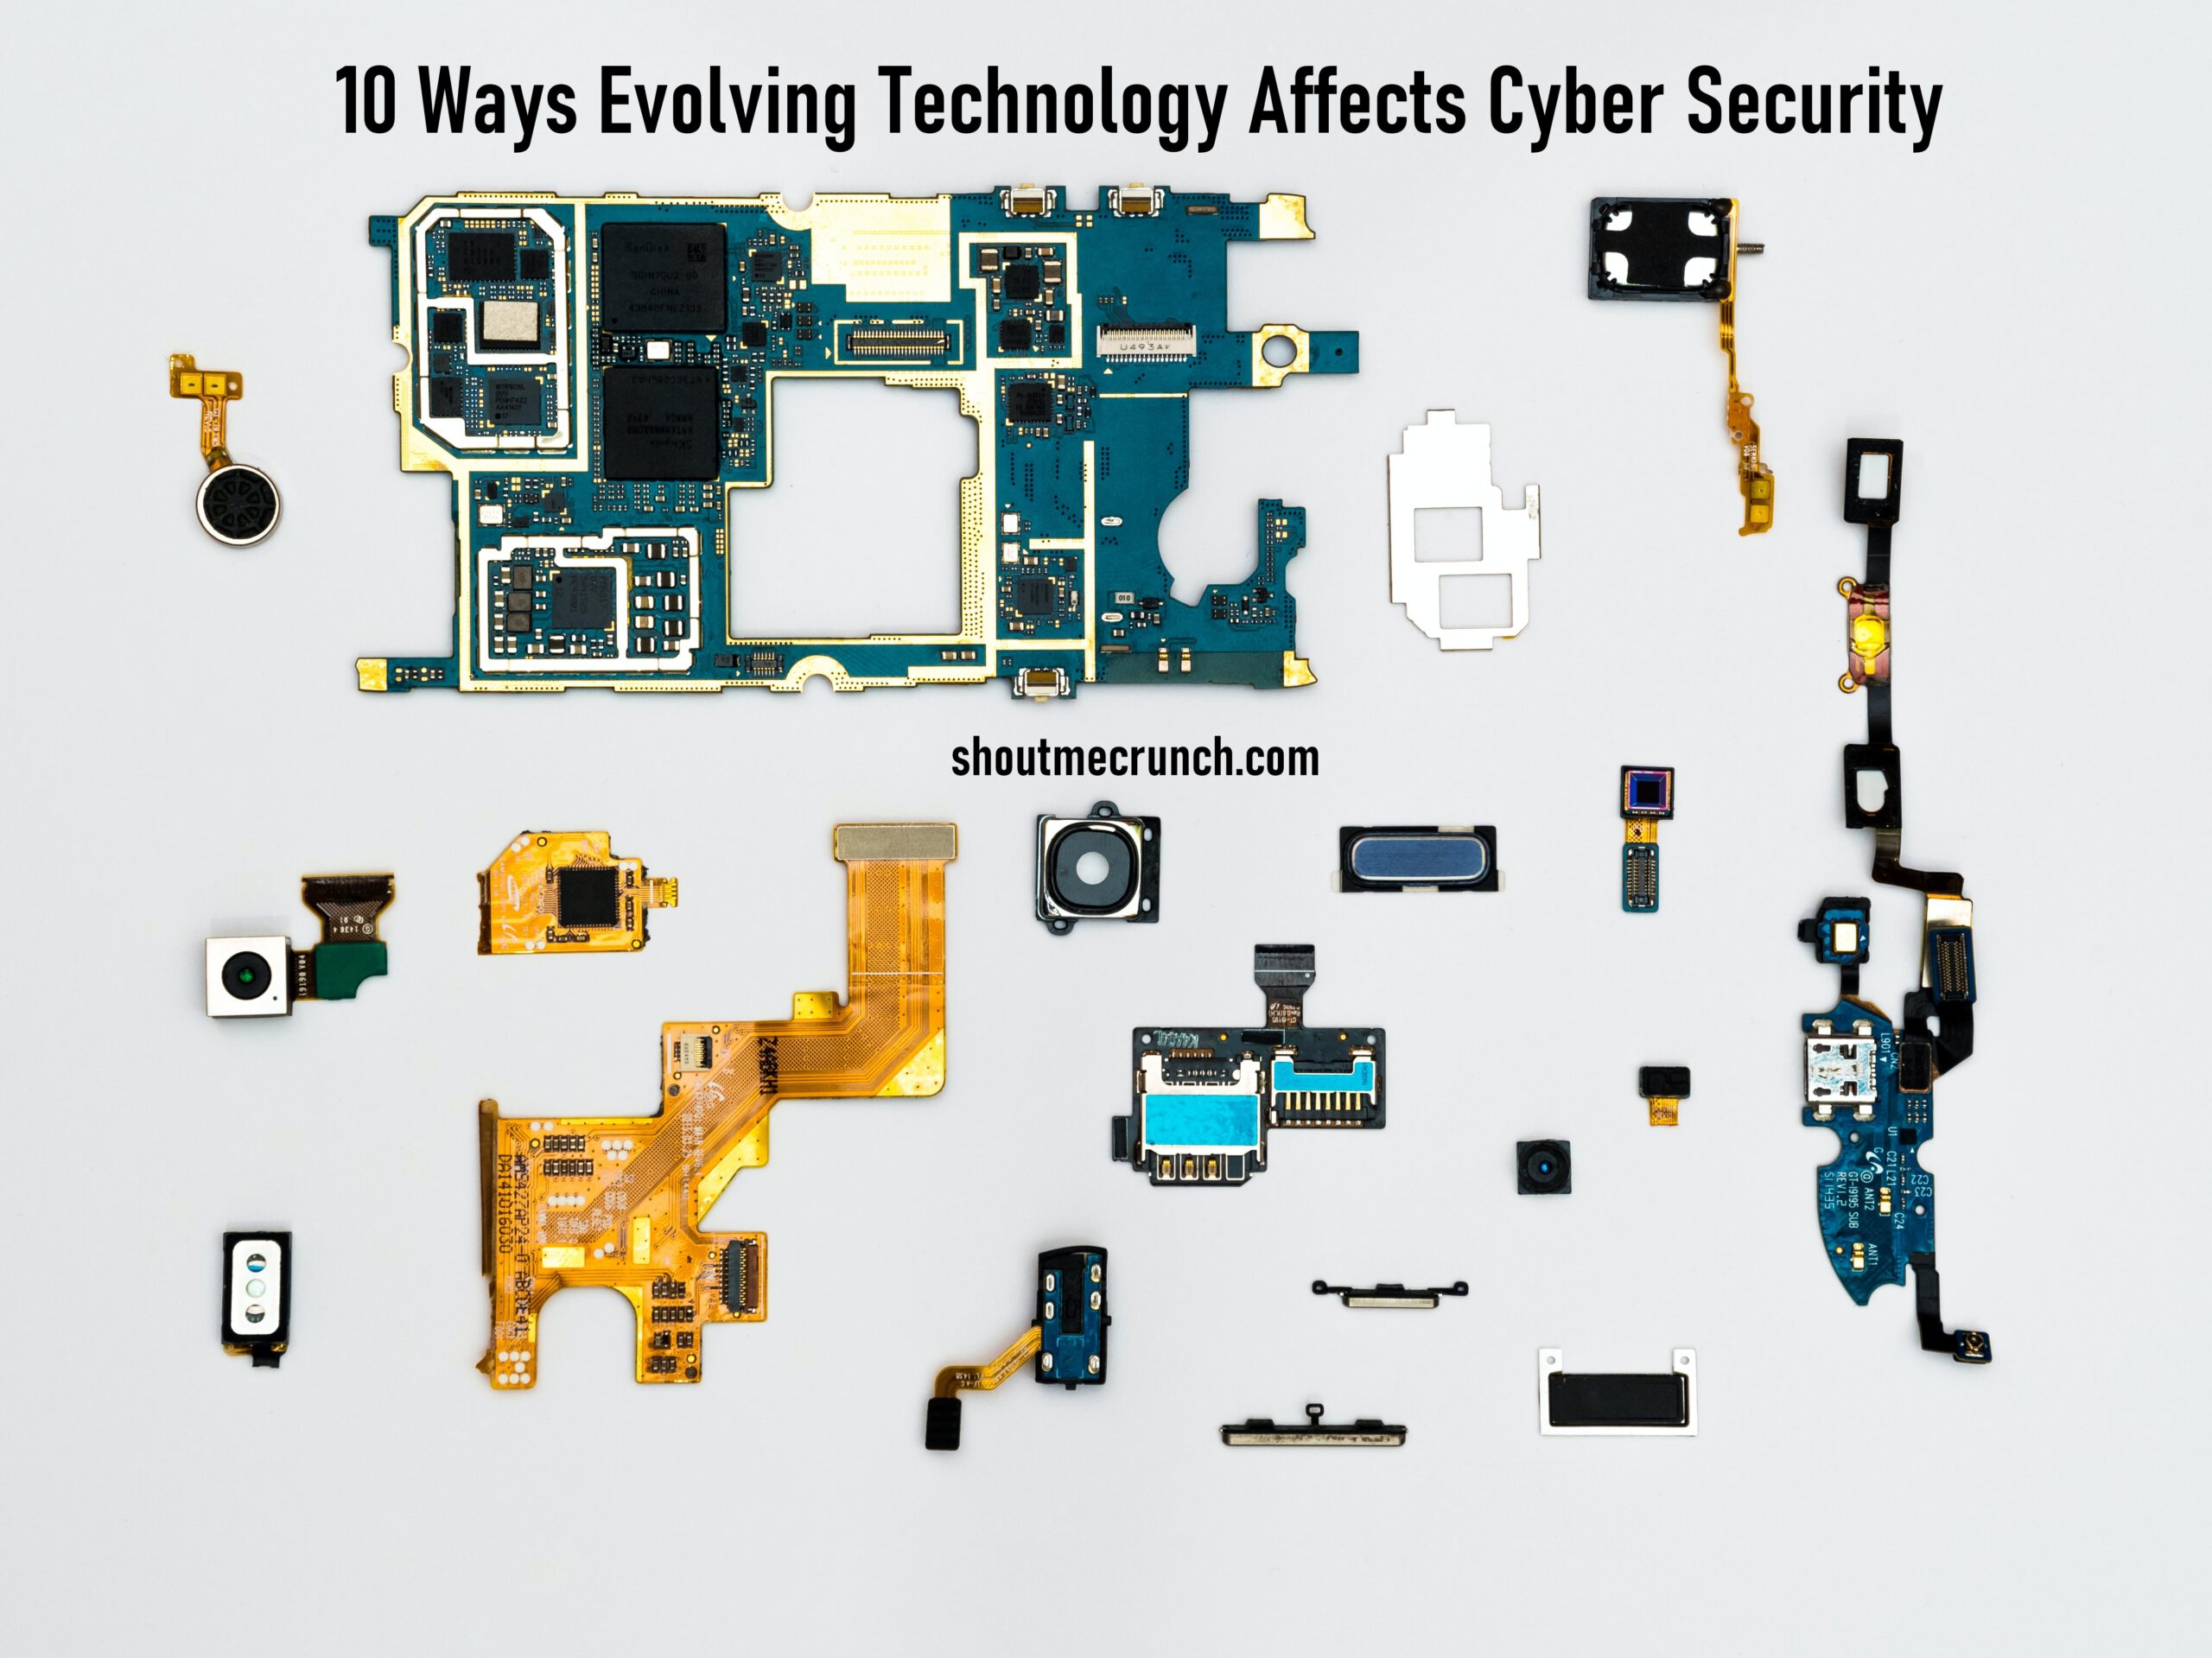 10 Ways Evolving Technology Affects Cyber Security scaled